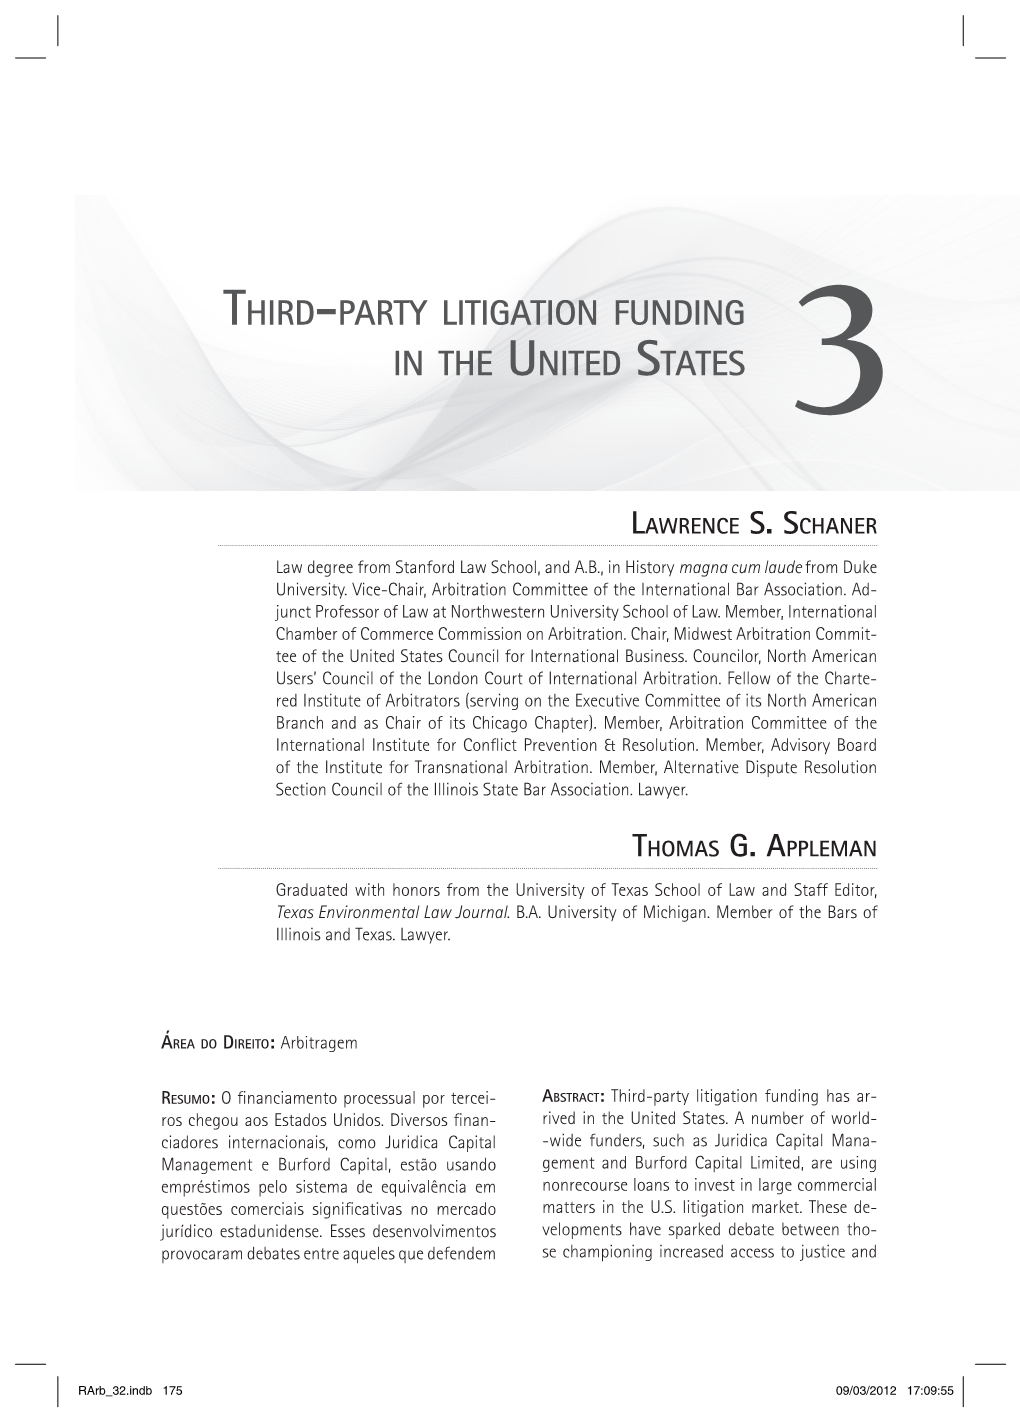 Third-Party Litigation Funding in the United States 3